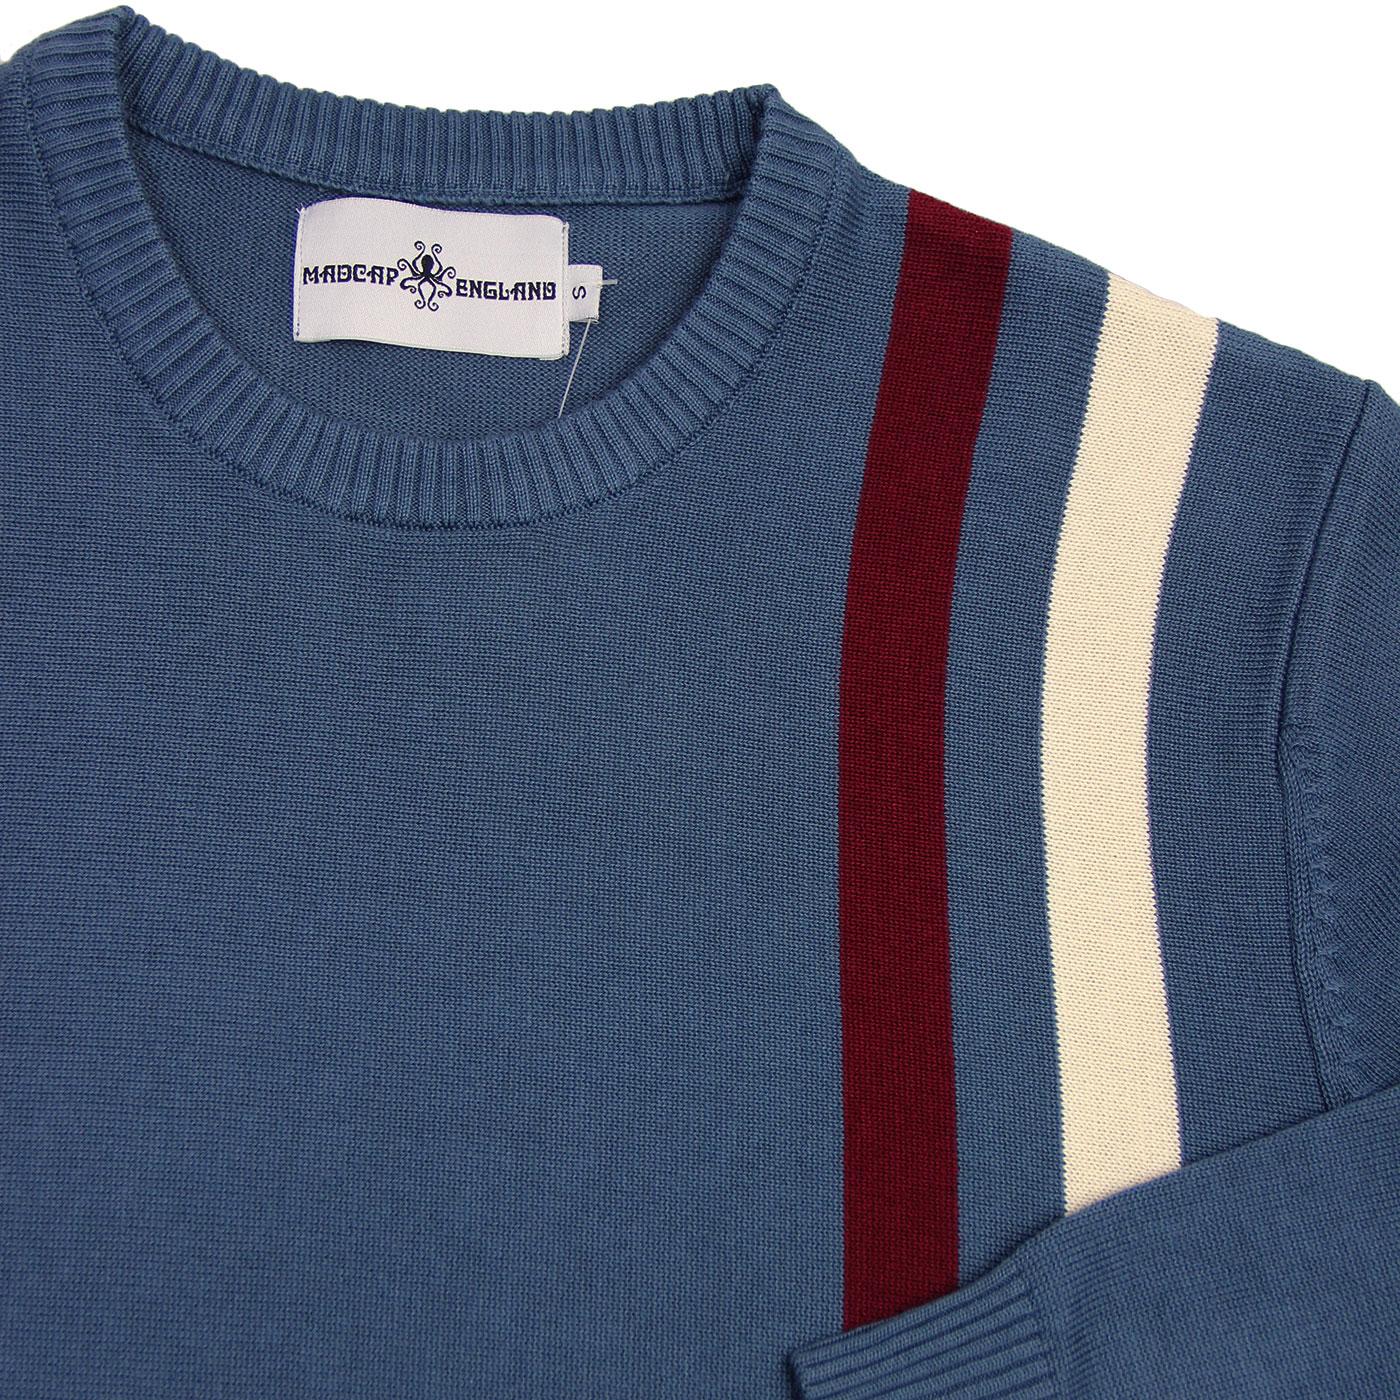 MADCAP ENGLAND Action Mod Racing Jumper in Orion Blue